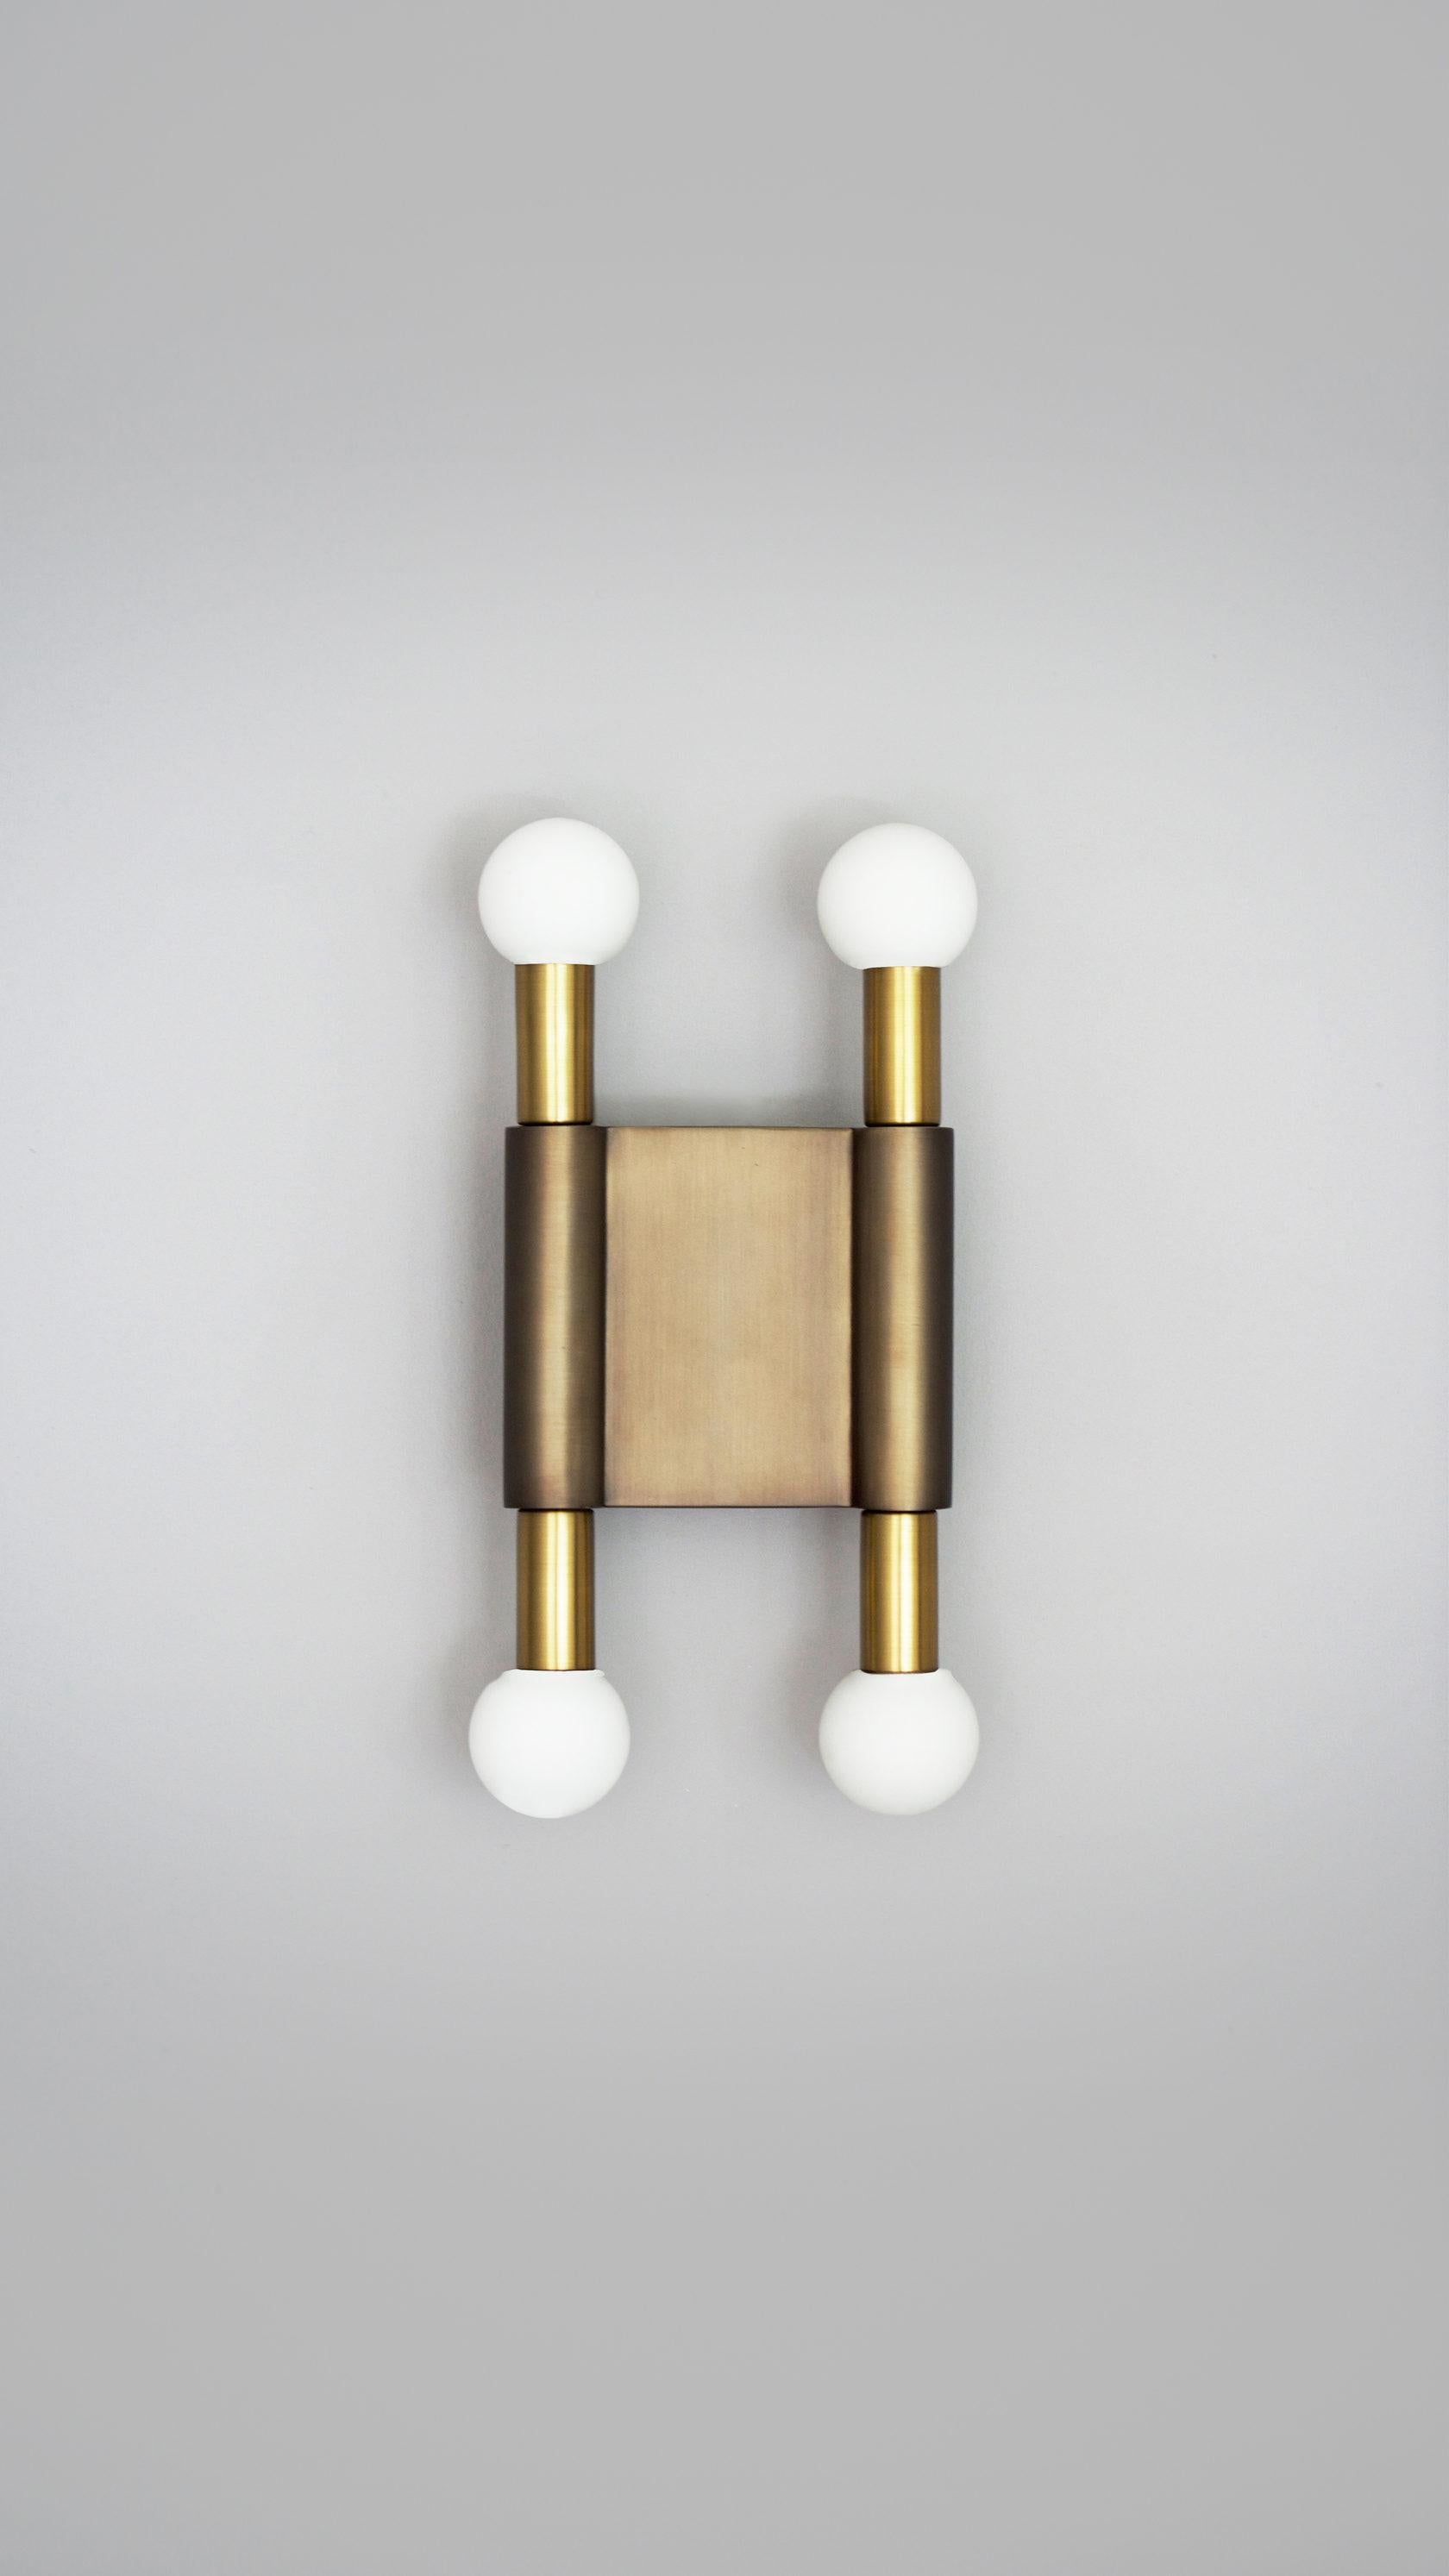 Bronze Pole and Circle II Wall Light by Square in Circle
Dimensions: W 16 x H 34 x D 7 cm
Materials: Dark bronze finish, brushed brass, opaque white glass globes

A minimal two-tone bronze wall light with opaque glass globes projecting from beneath